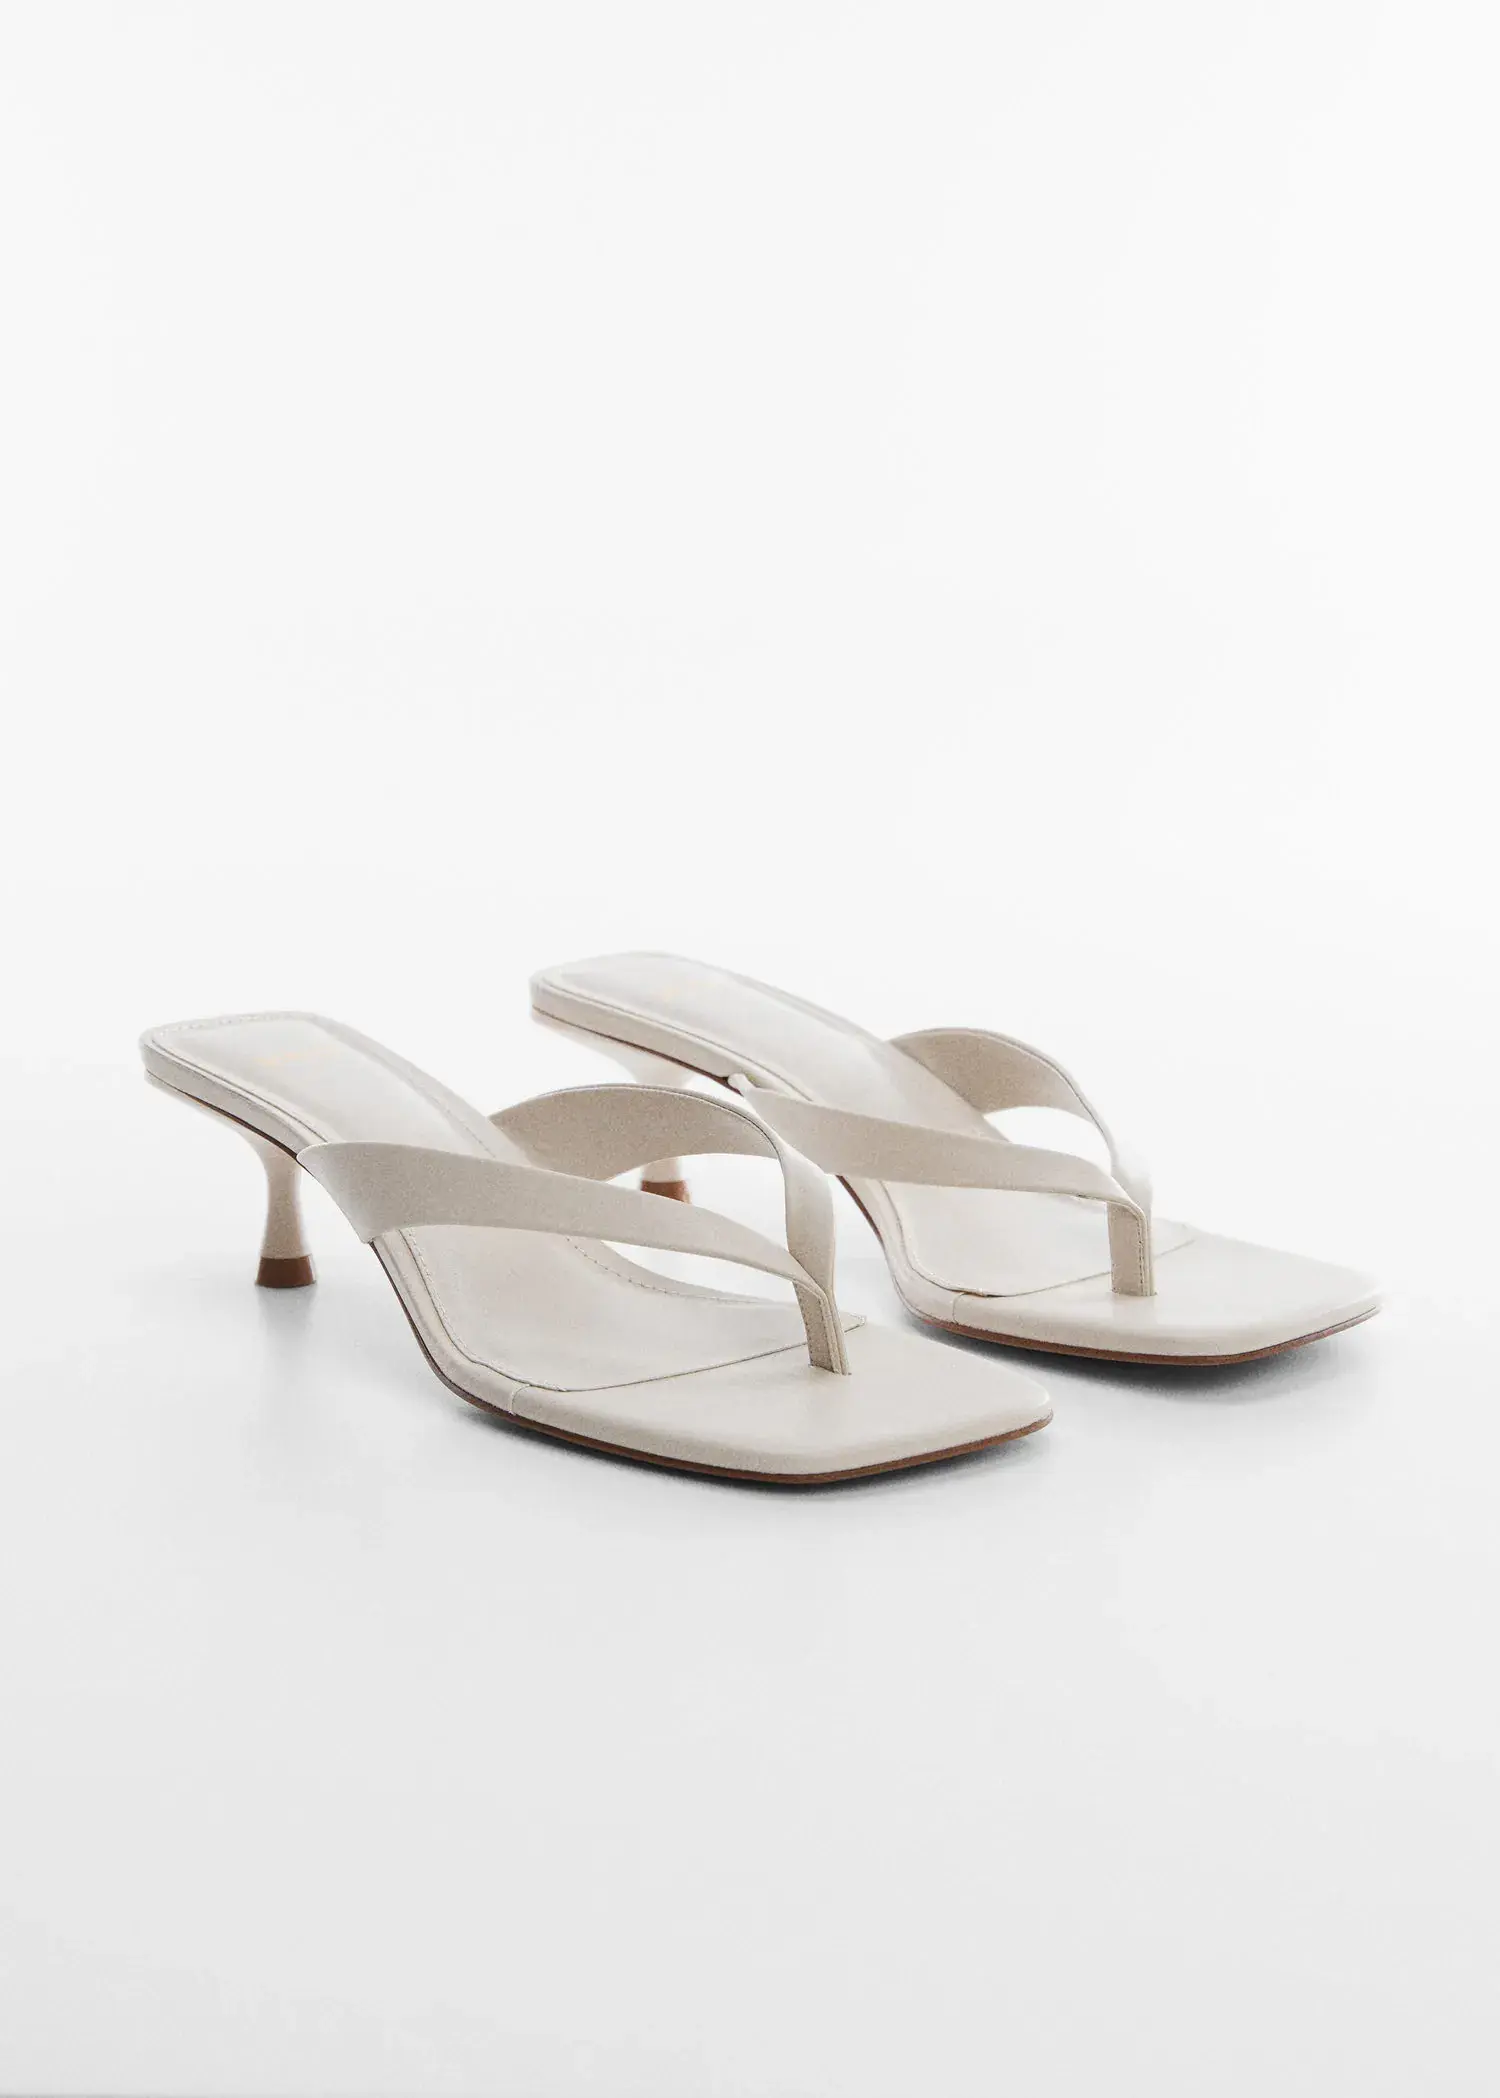 Mango Kitten heel sandals. a pair of white sandals on a white surface. 